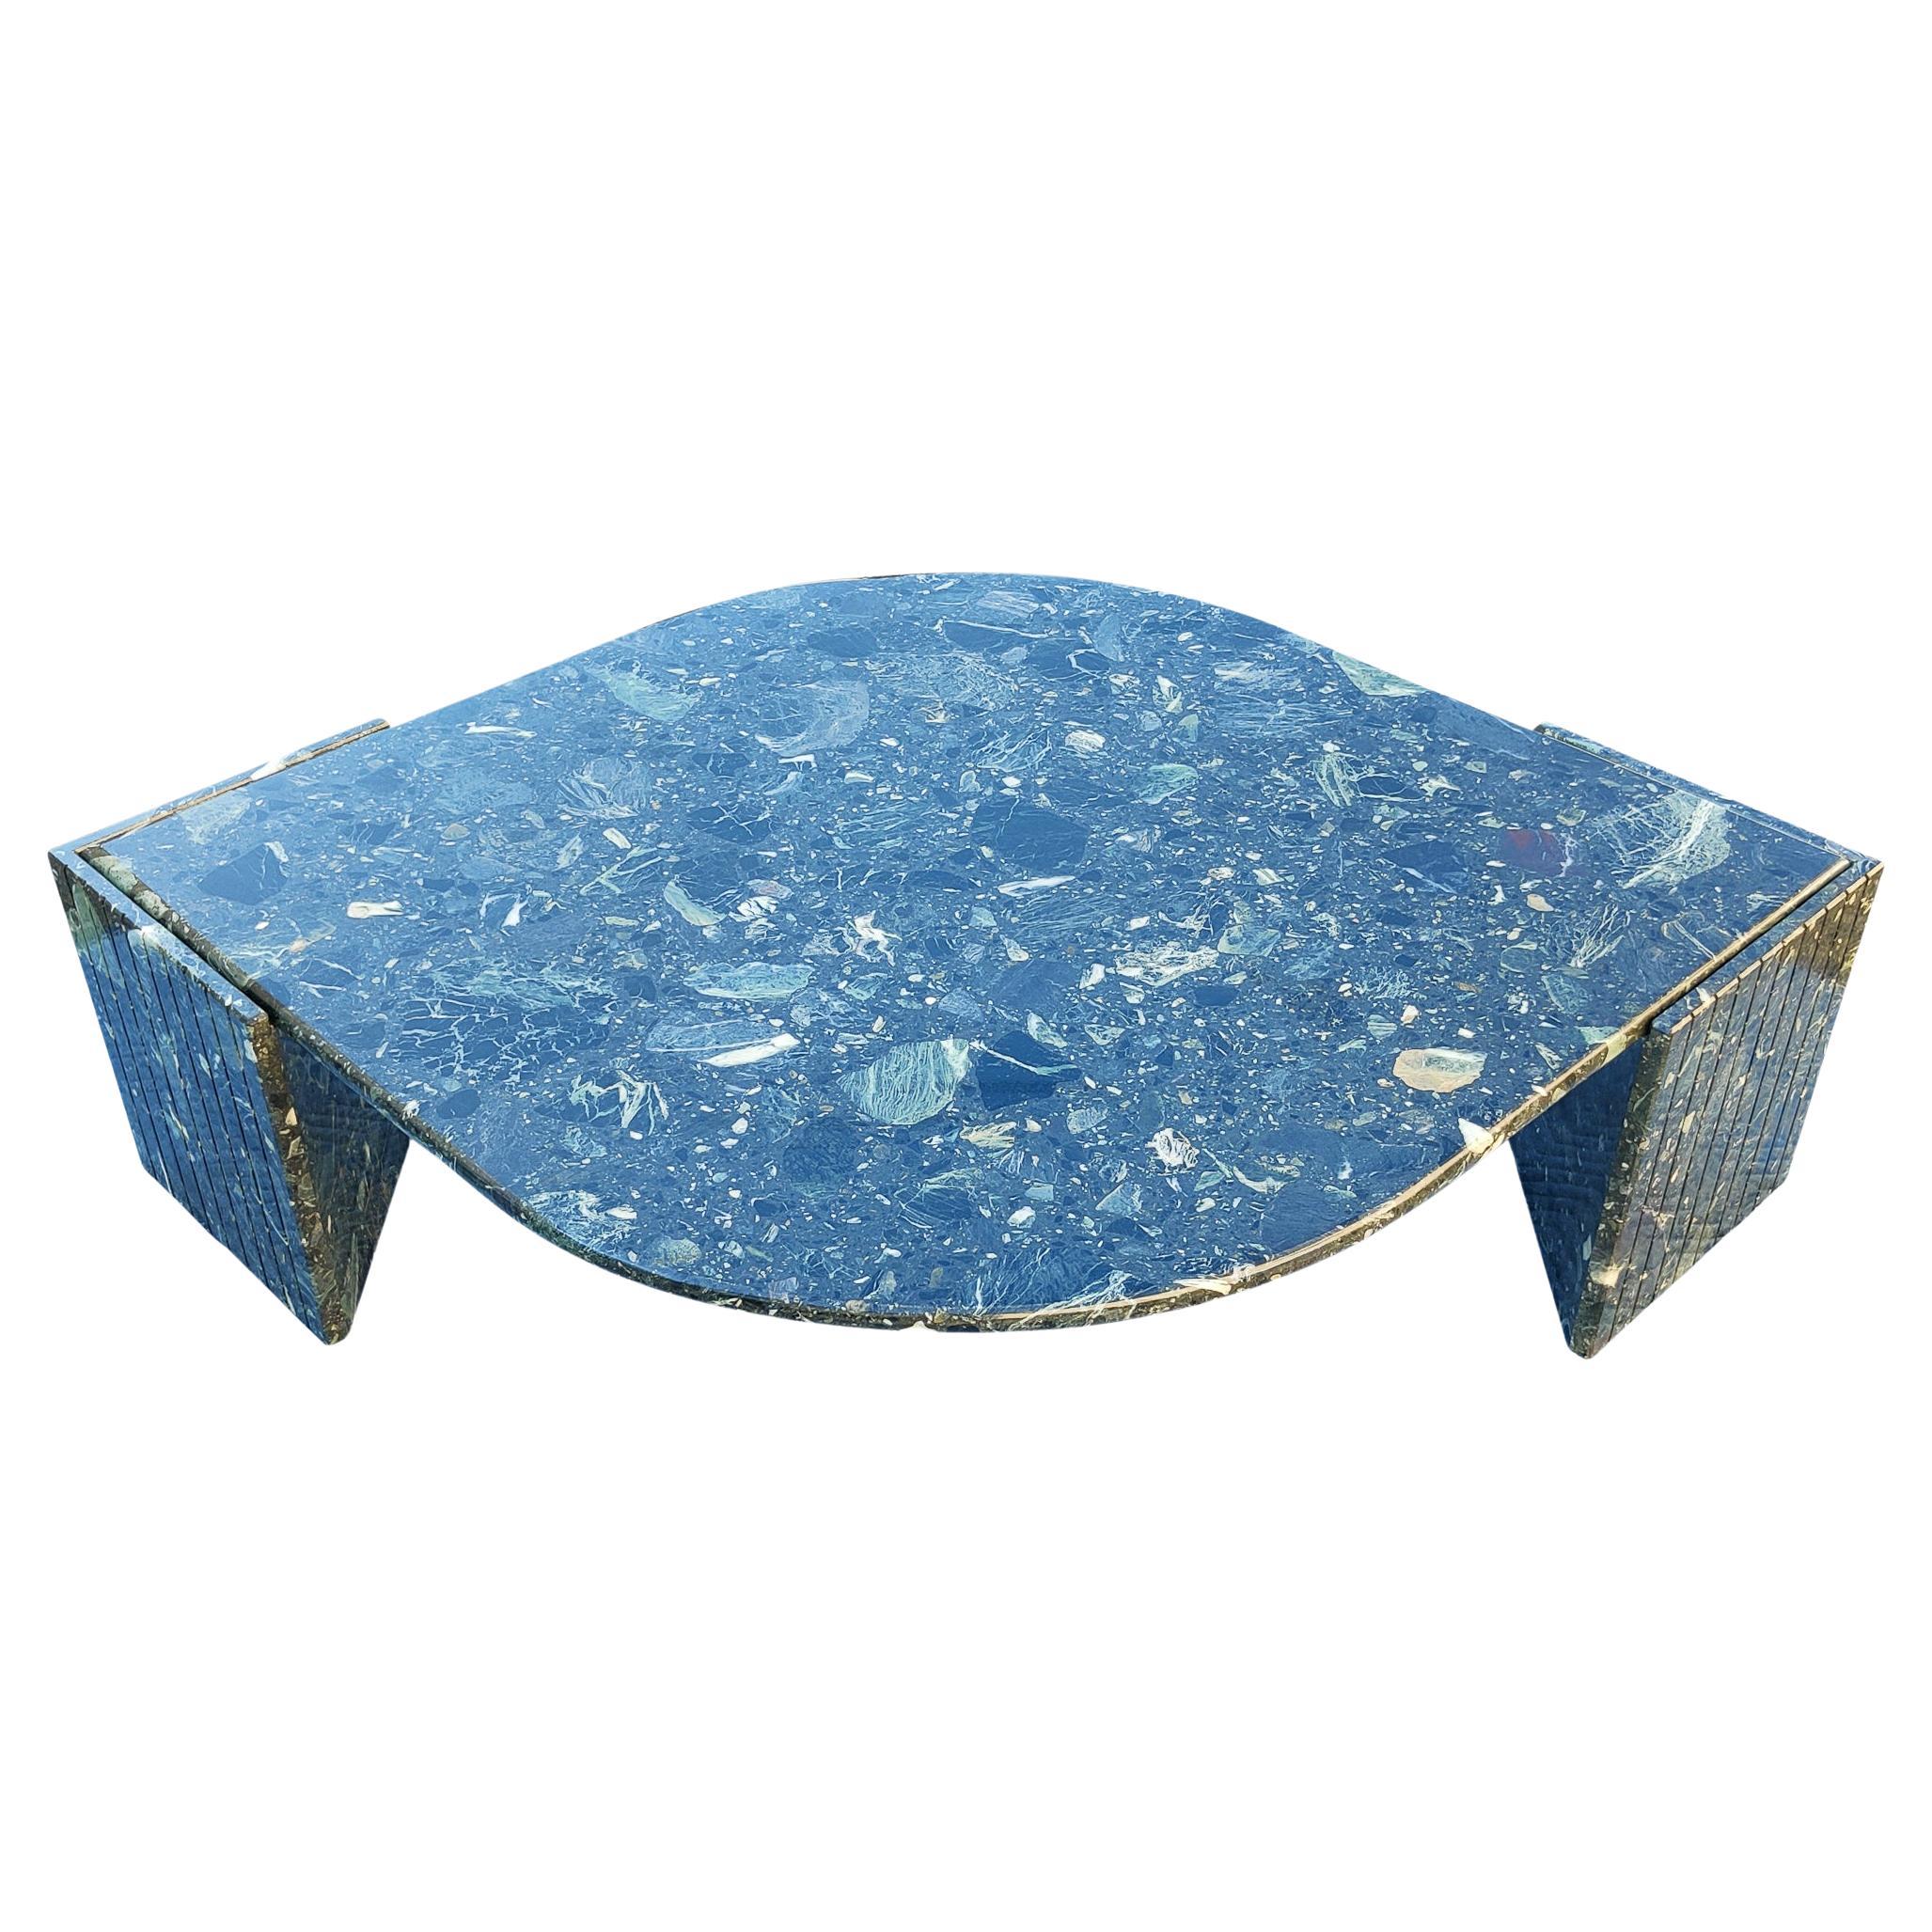 This rare Italian marble table is, unlike many others, made of breccio marble. Sitting on two very heavy V-shaped blocks, it stands very stable. The color and graining in the marble is amazing. Predominantly dark green, with lighter shades of green.